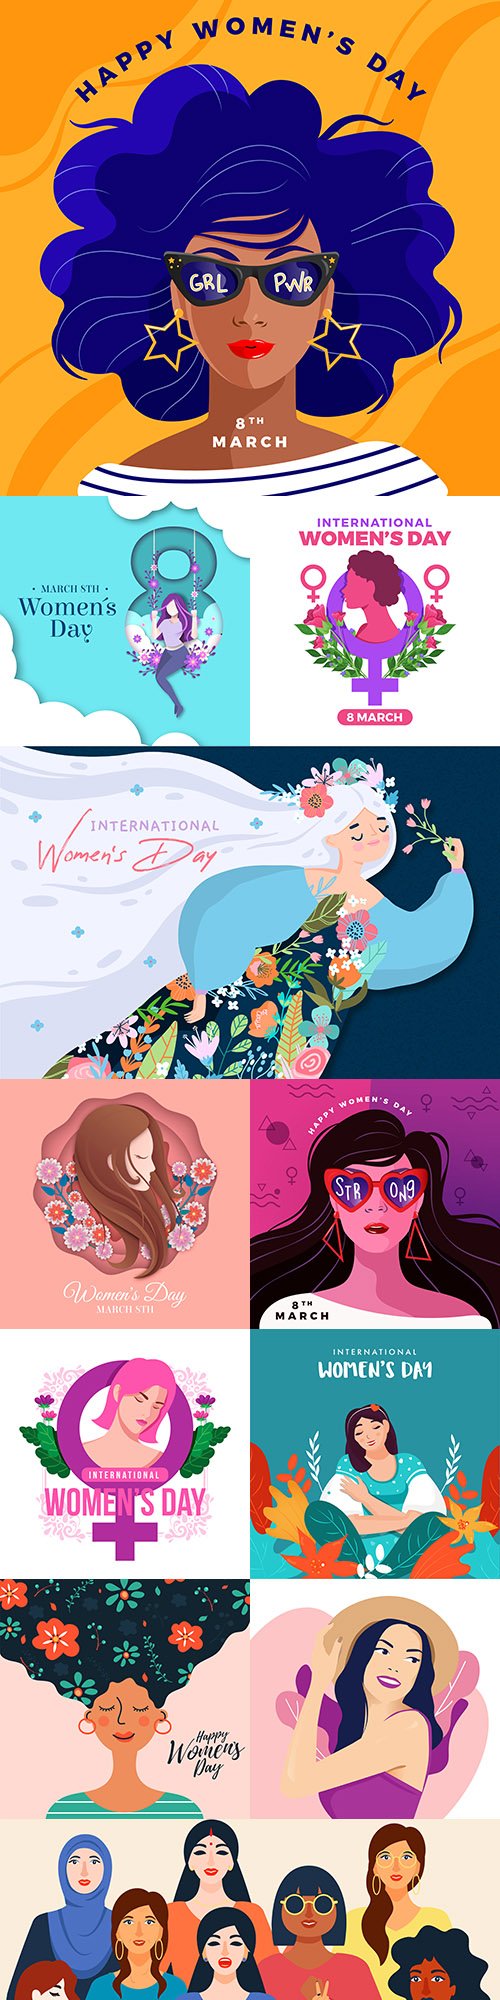 March 8 and Women's Day illustration flat design 10